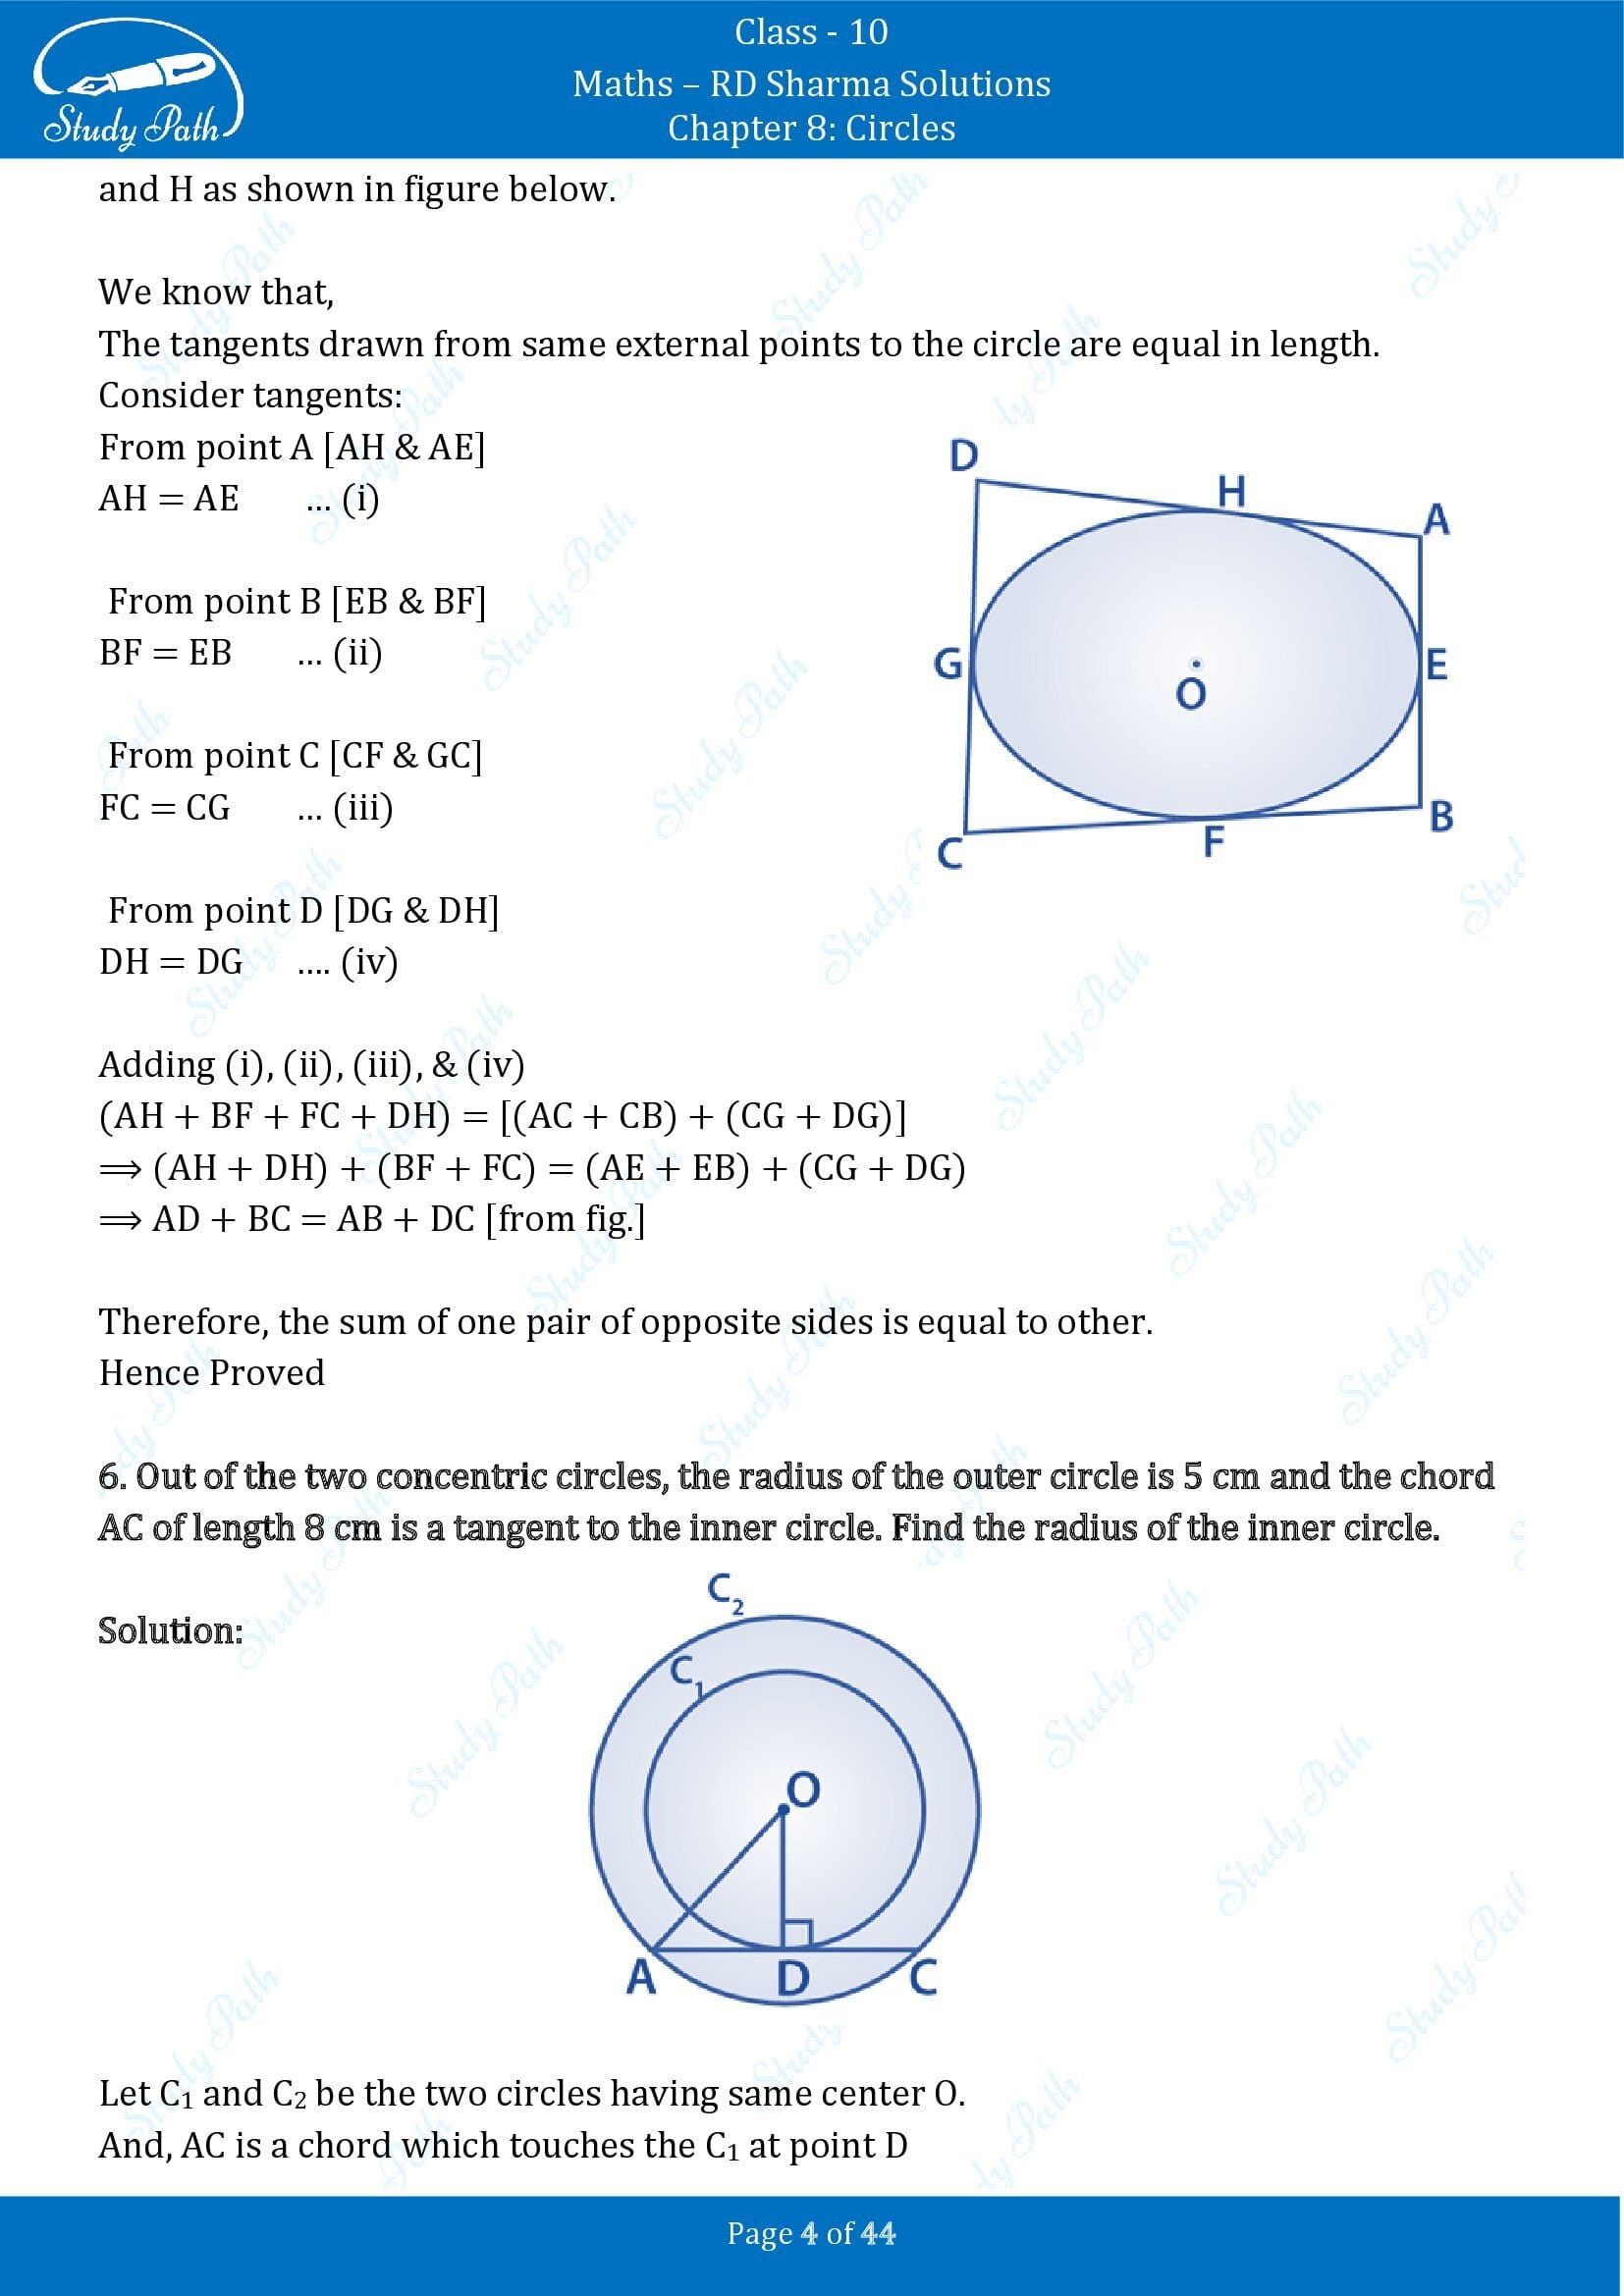 RD Sharma Solutions Class 10 Chapter 8 Circles Exercise 8.2 00004